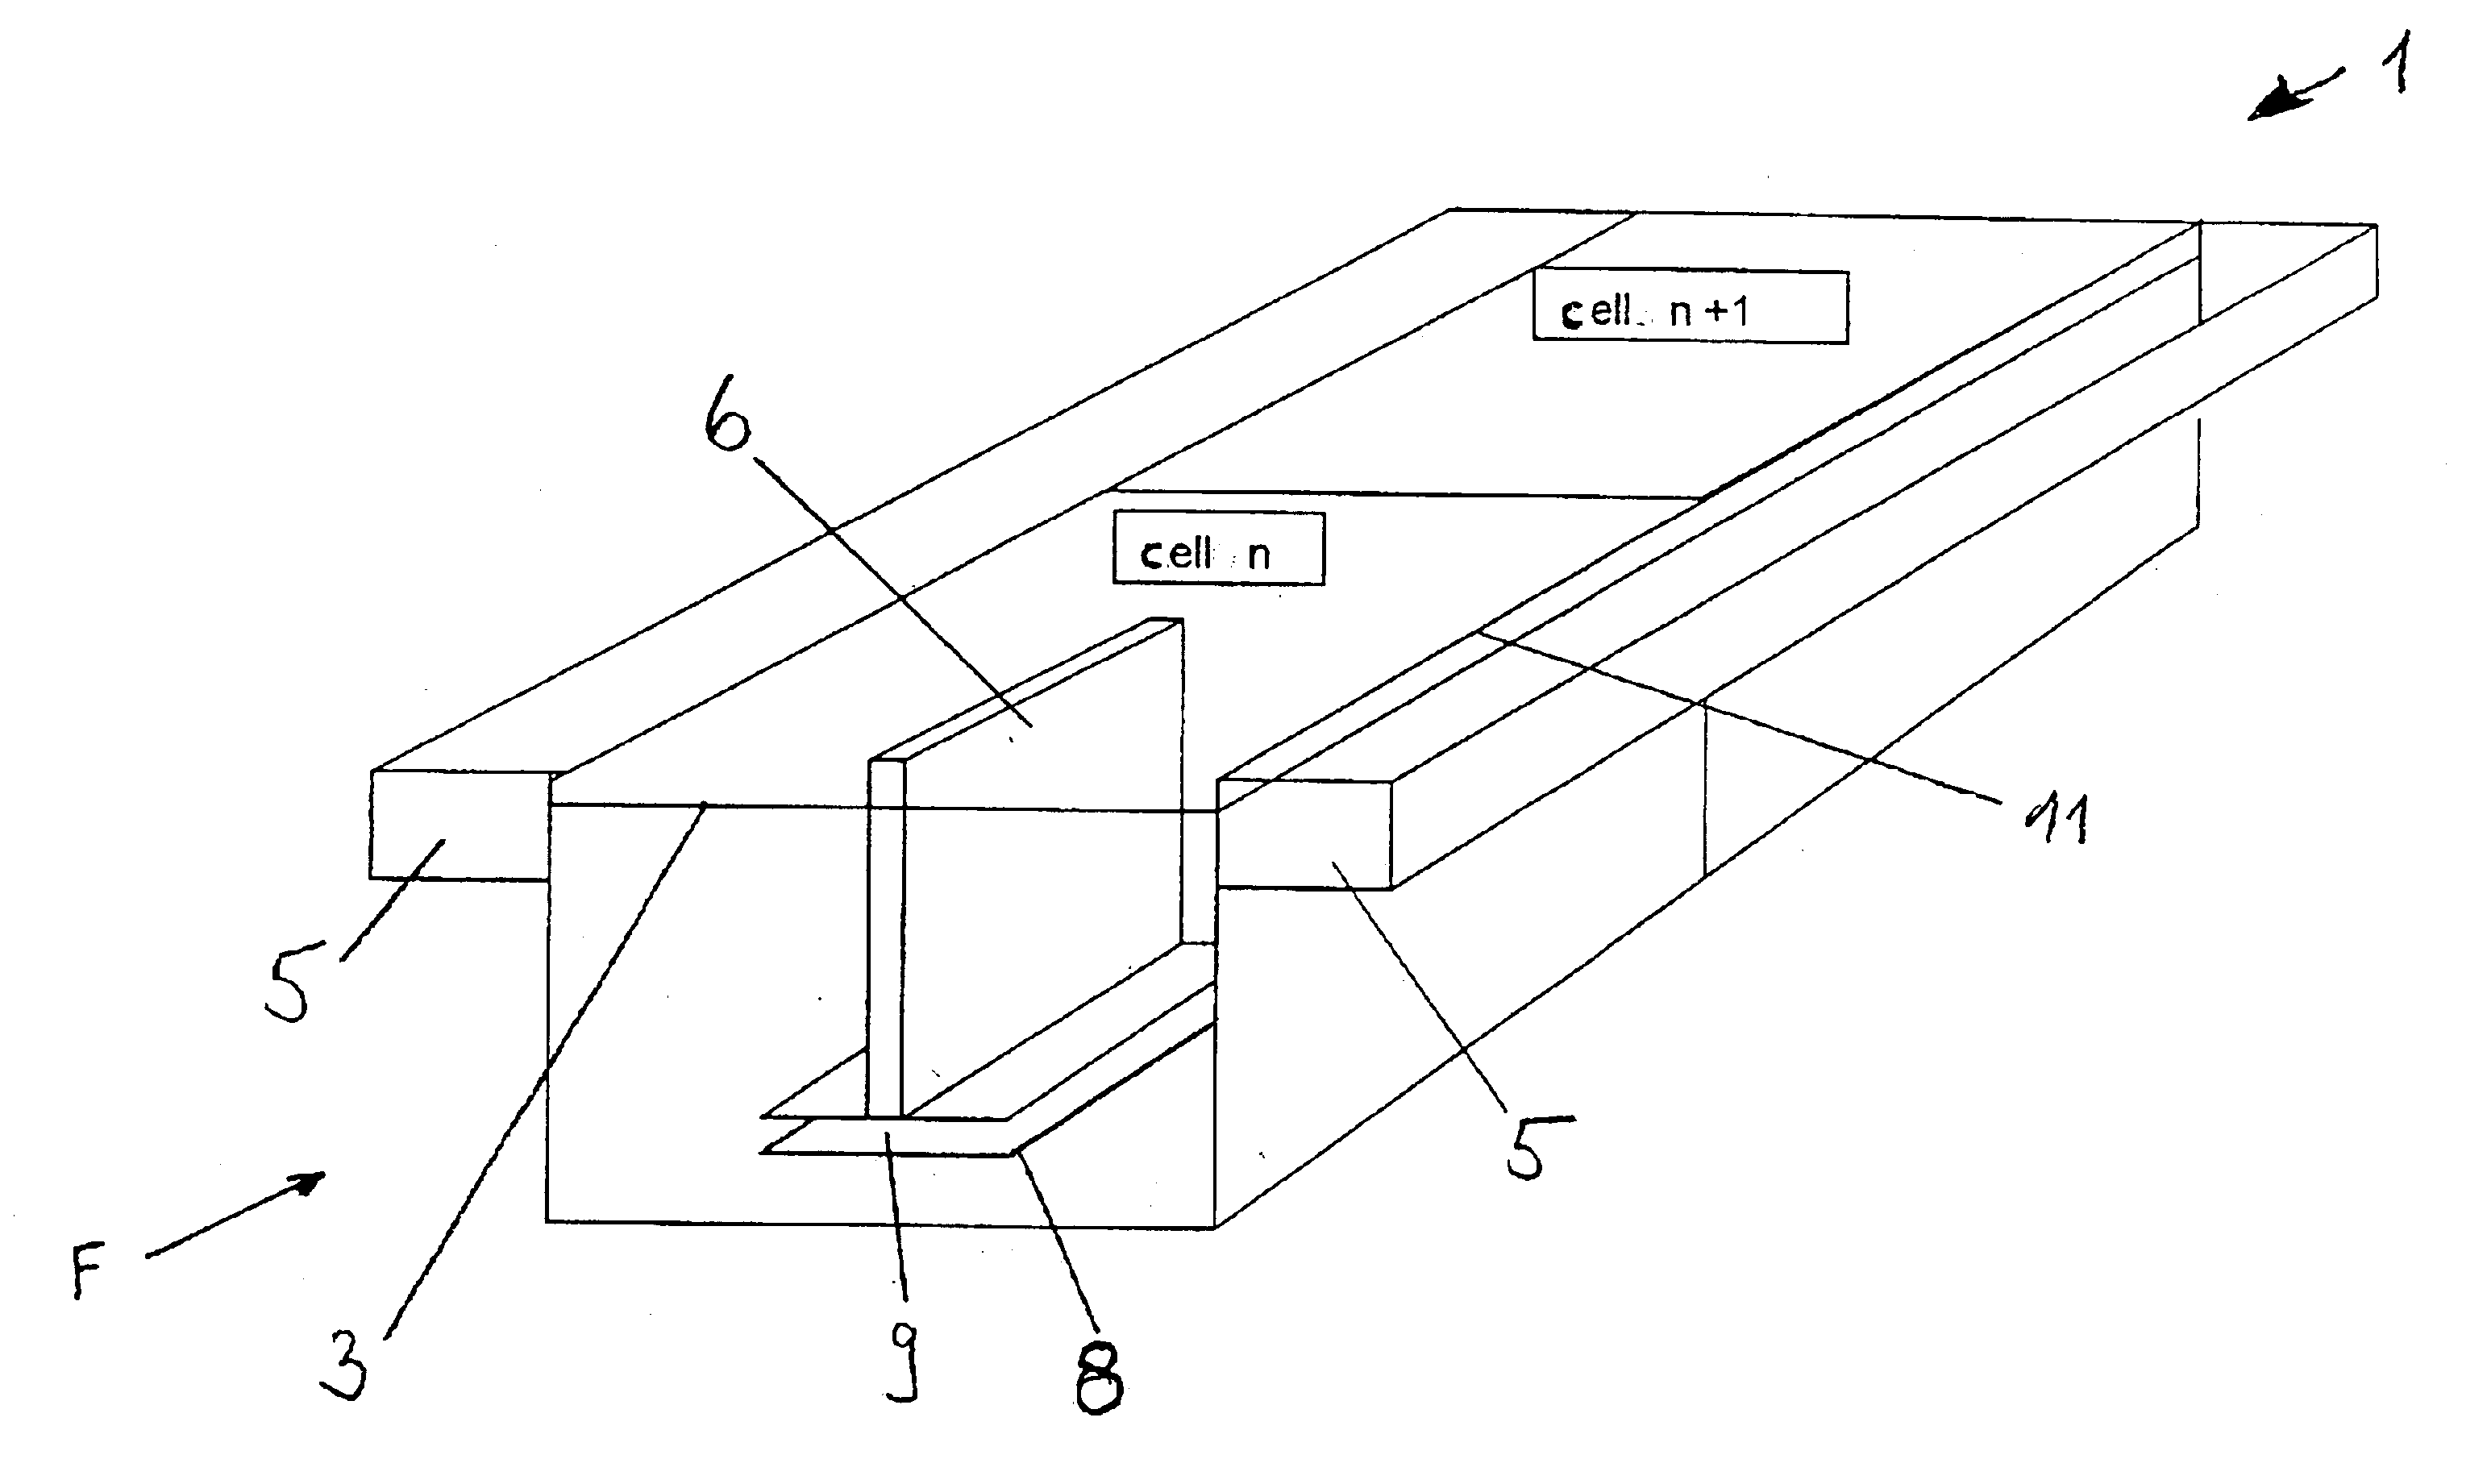 Device for separating solids from liquids by means of flotation